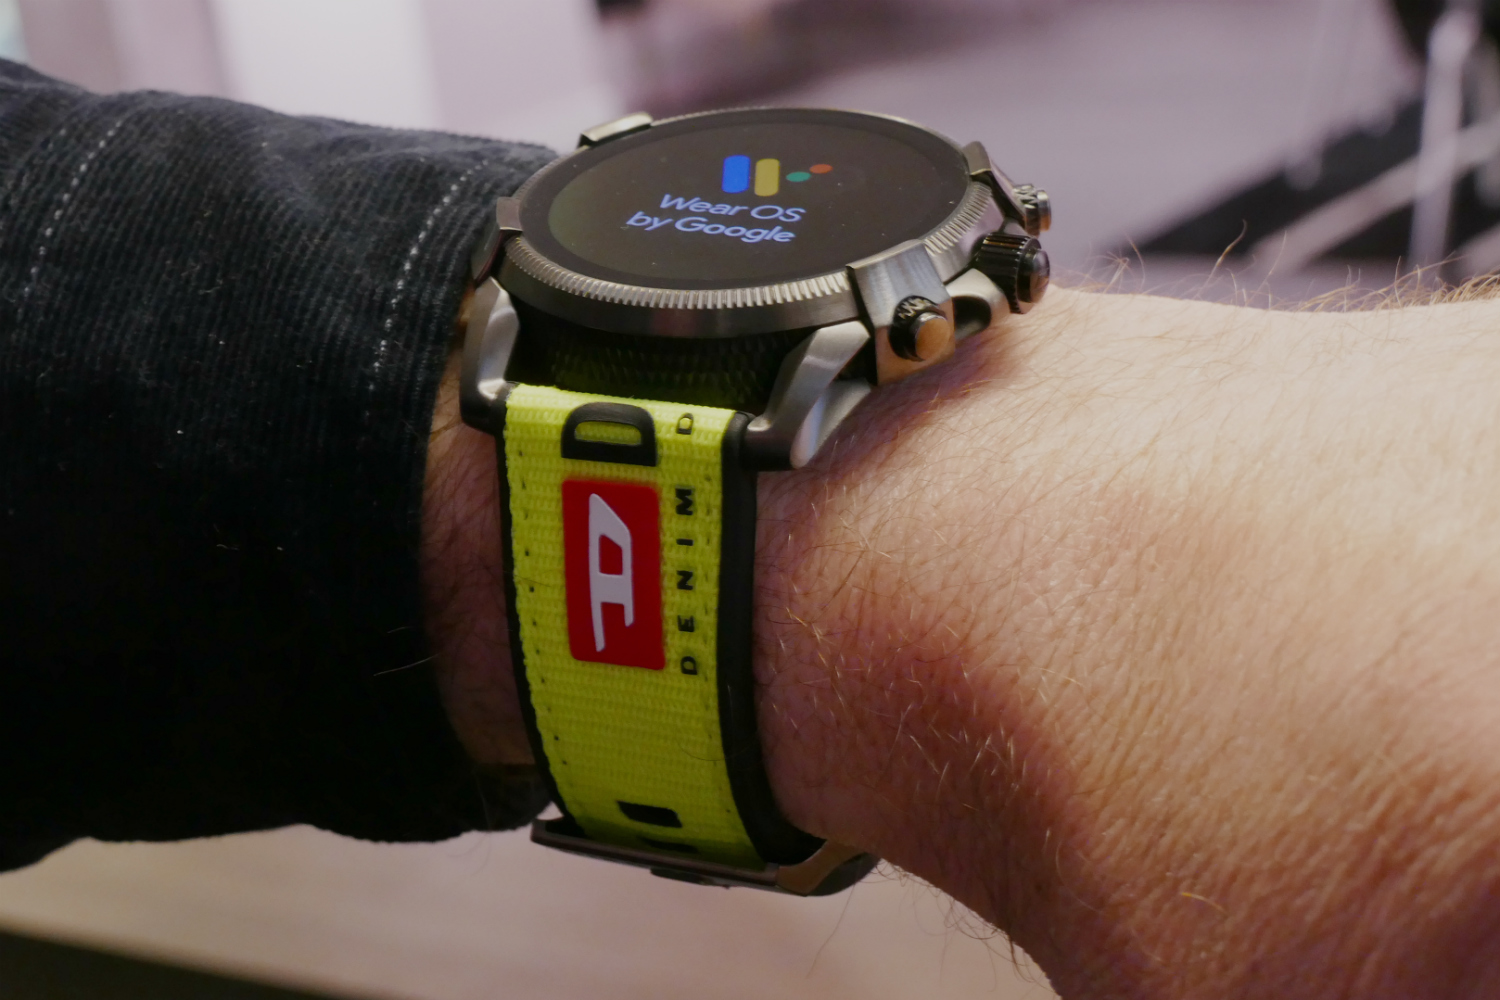 Diesel On Full Guard 2.5 Review: Love the Smartwatch's Look, Hate